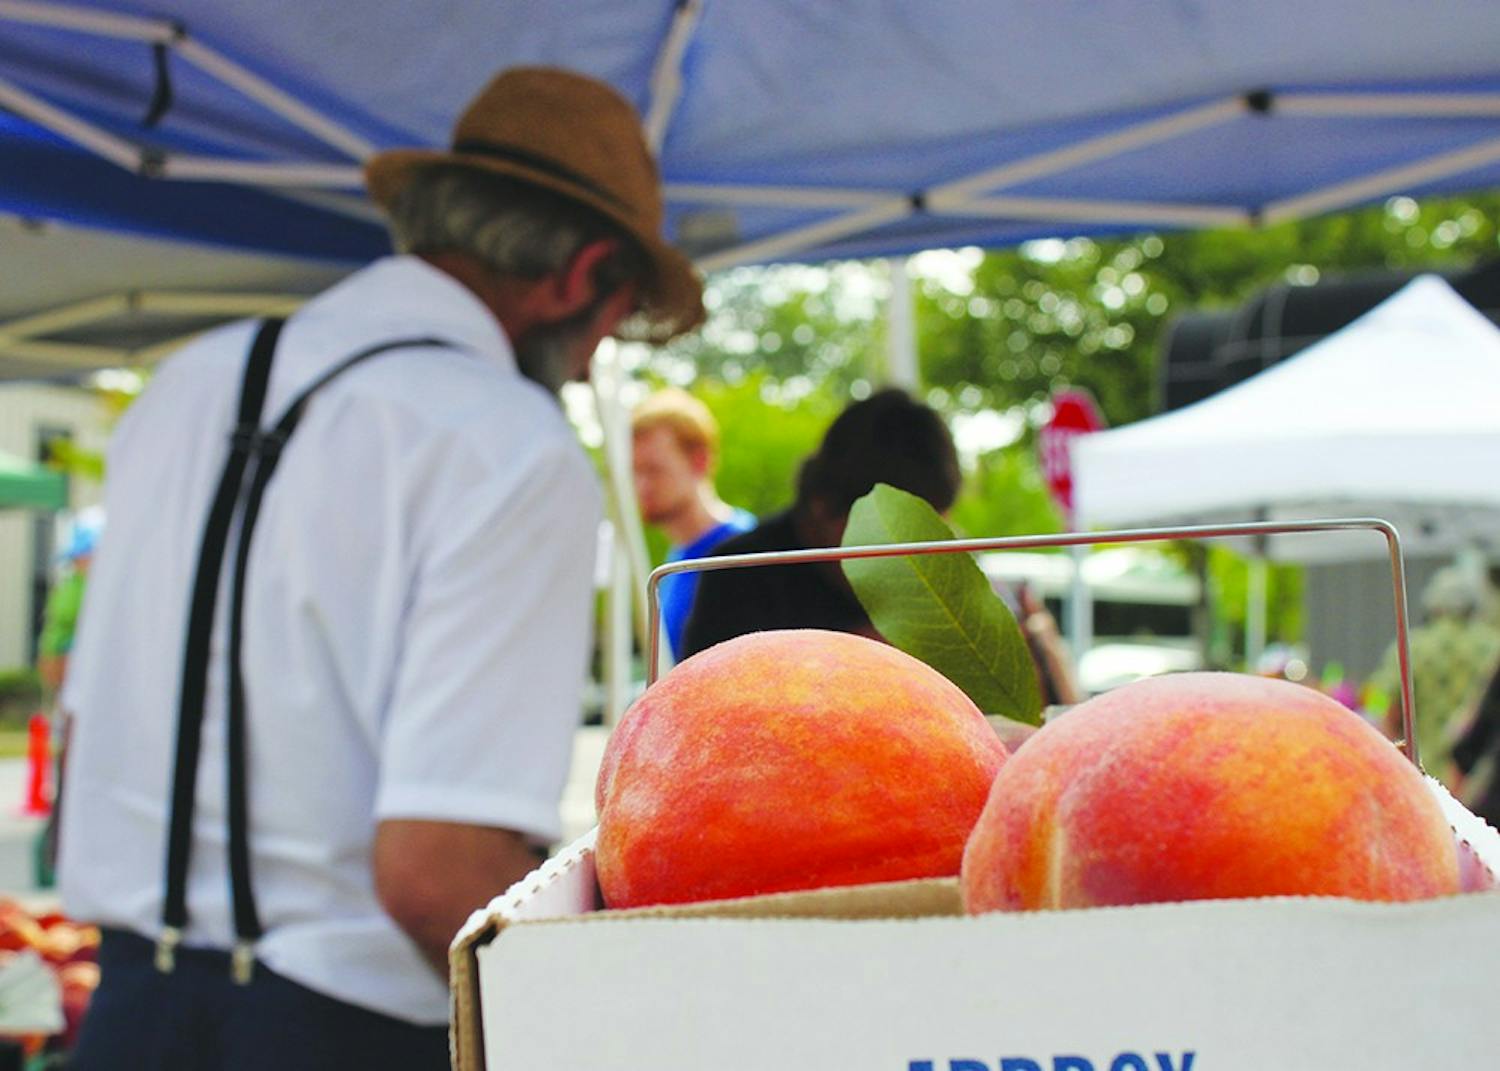 Daniel Graber sells fruit at the Bloomington Farmers' Market in 2013 in front of a box of peaches, his main crop. The city's director of economic and sustainability development discussed the city's solar energy initiative at Saturday's market.